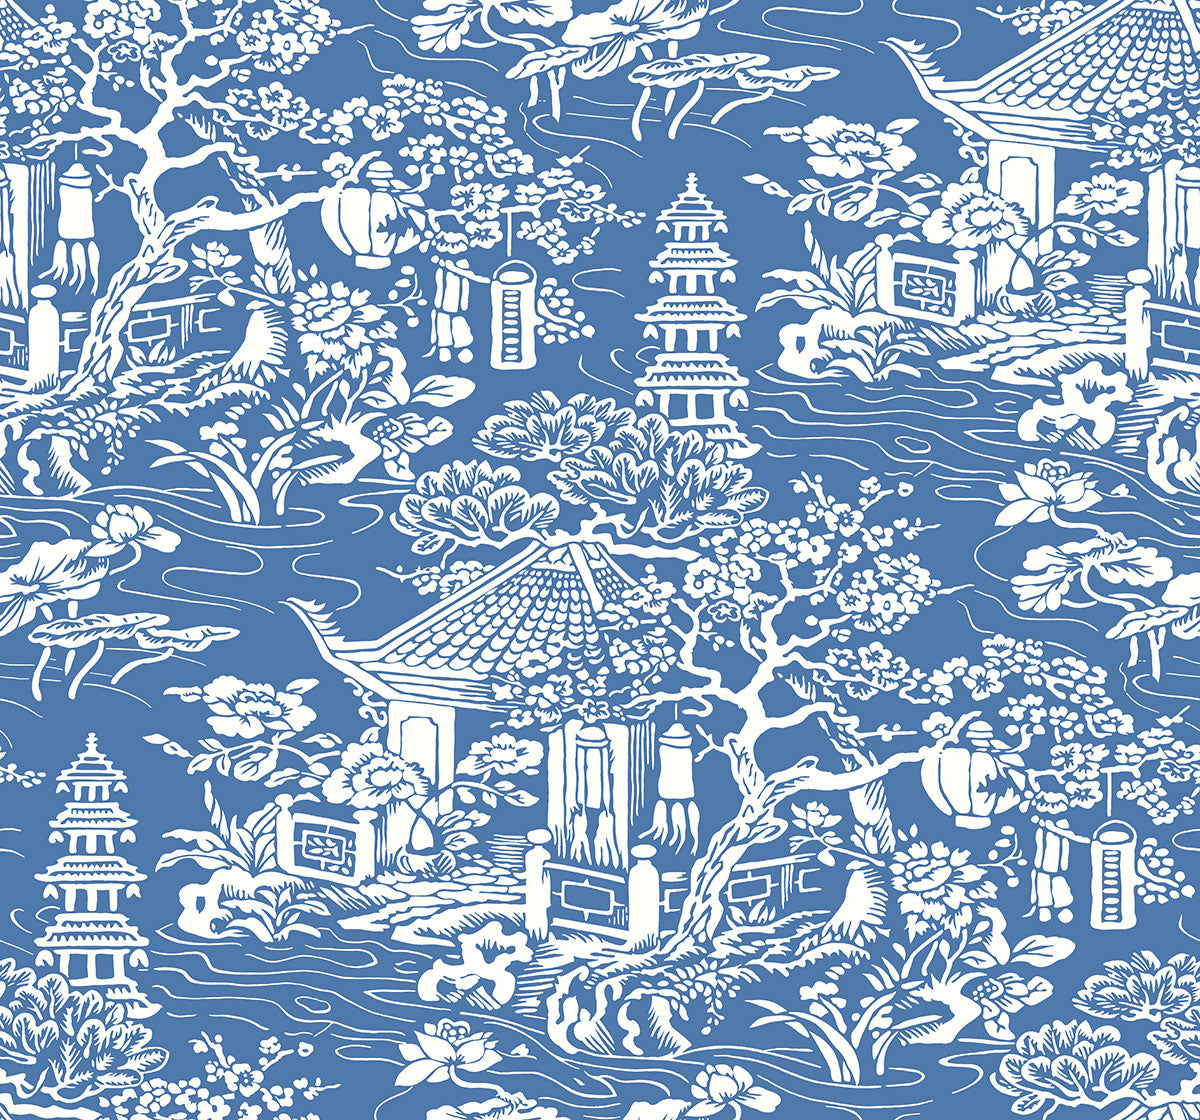 Chinoiserie Toile - Decorating with Blue and White